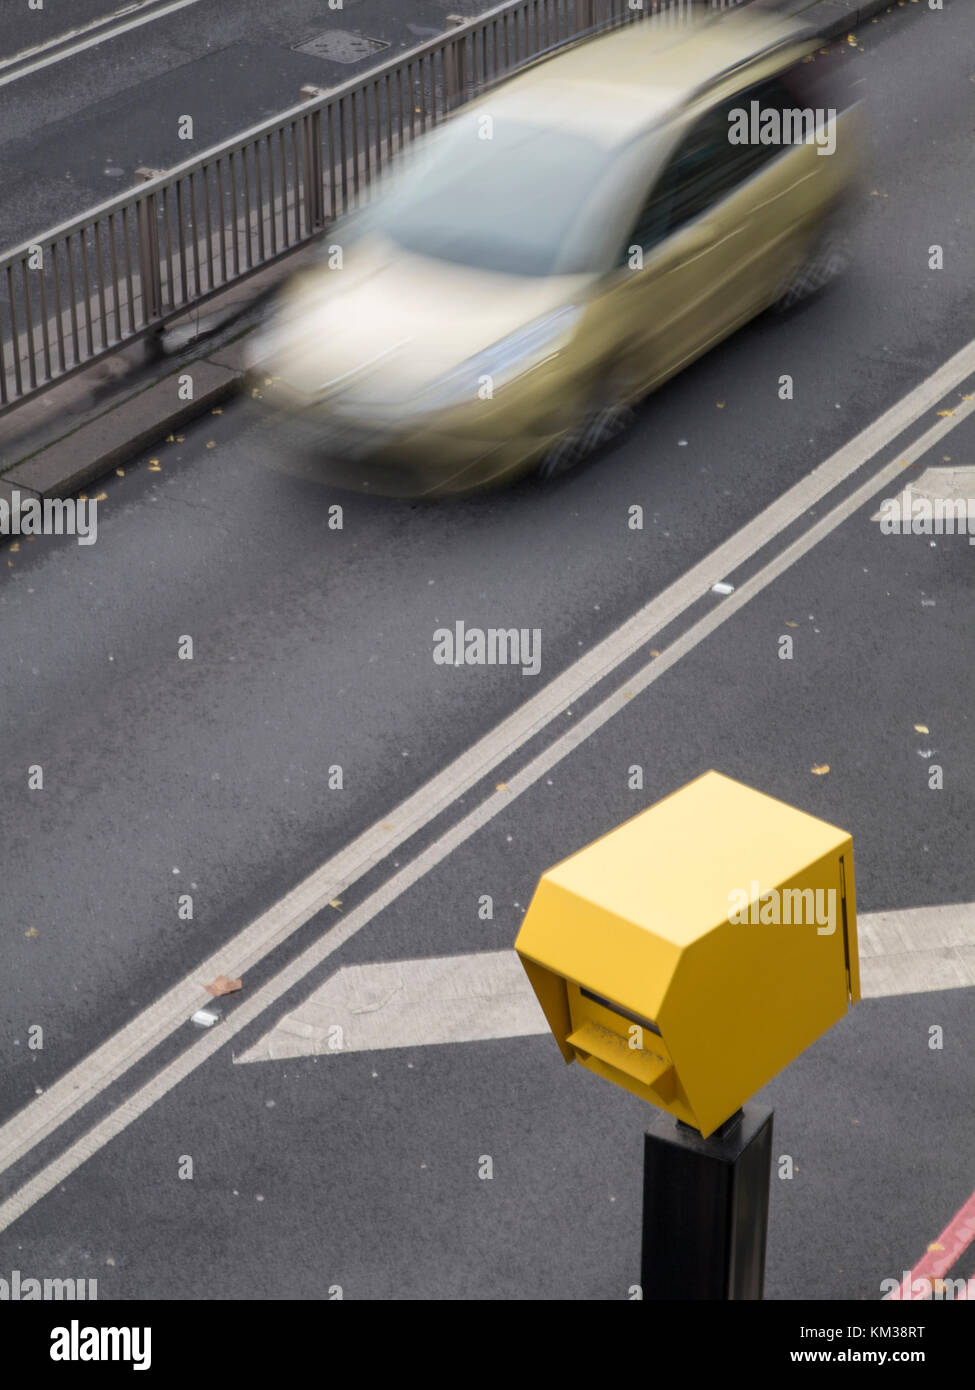 A speed camera in London checking for speeding cars Stock Photo